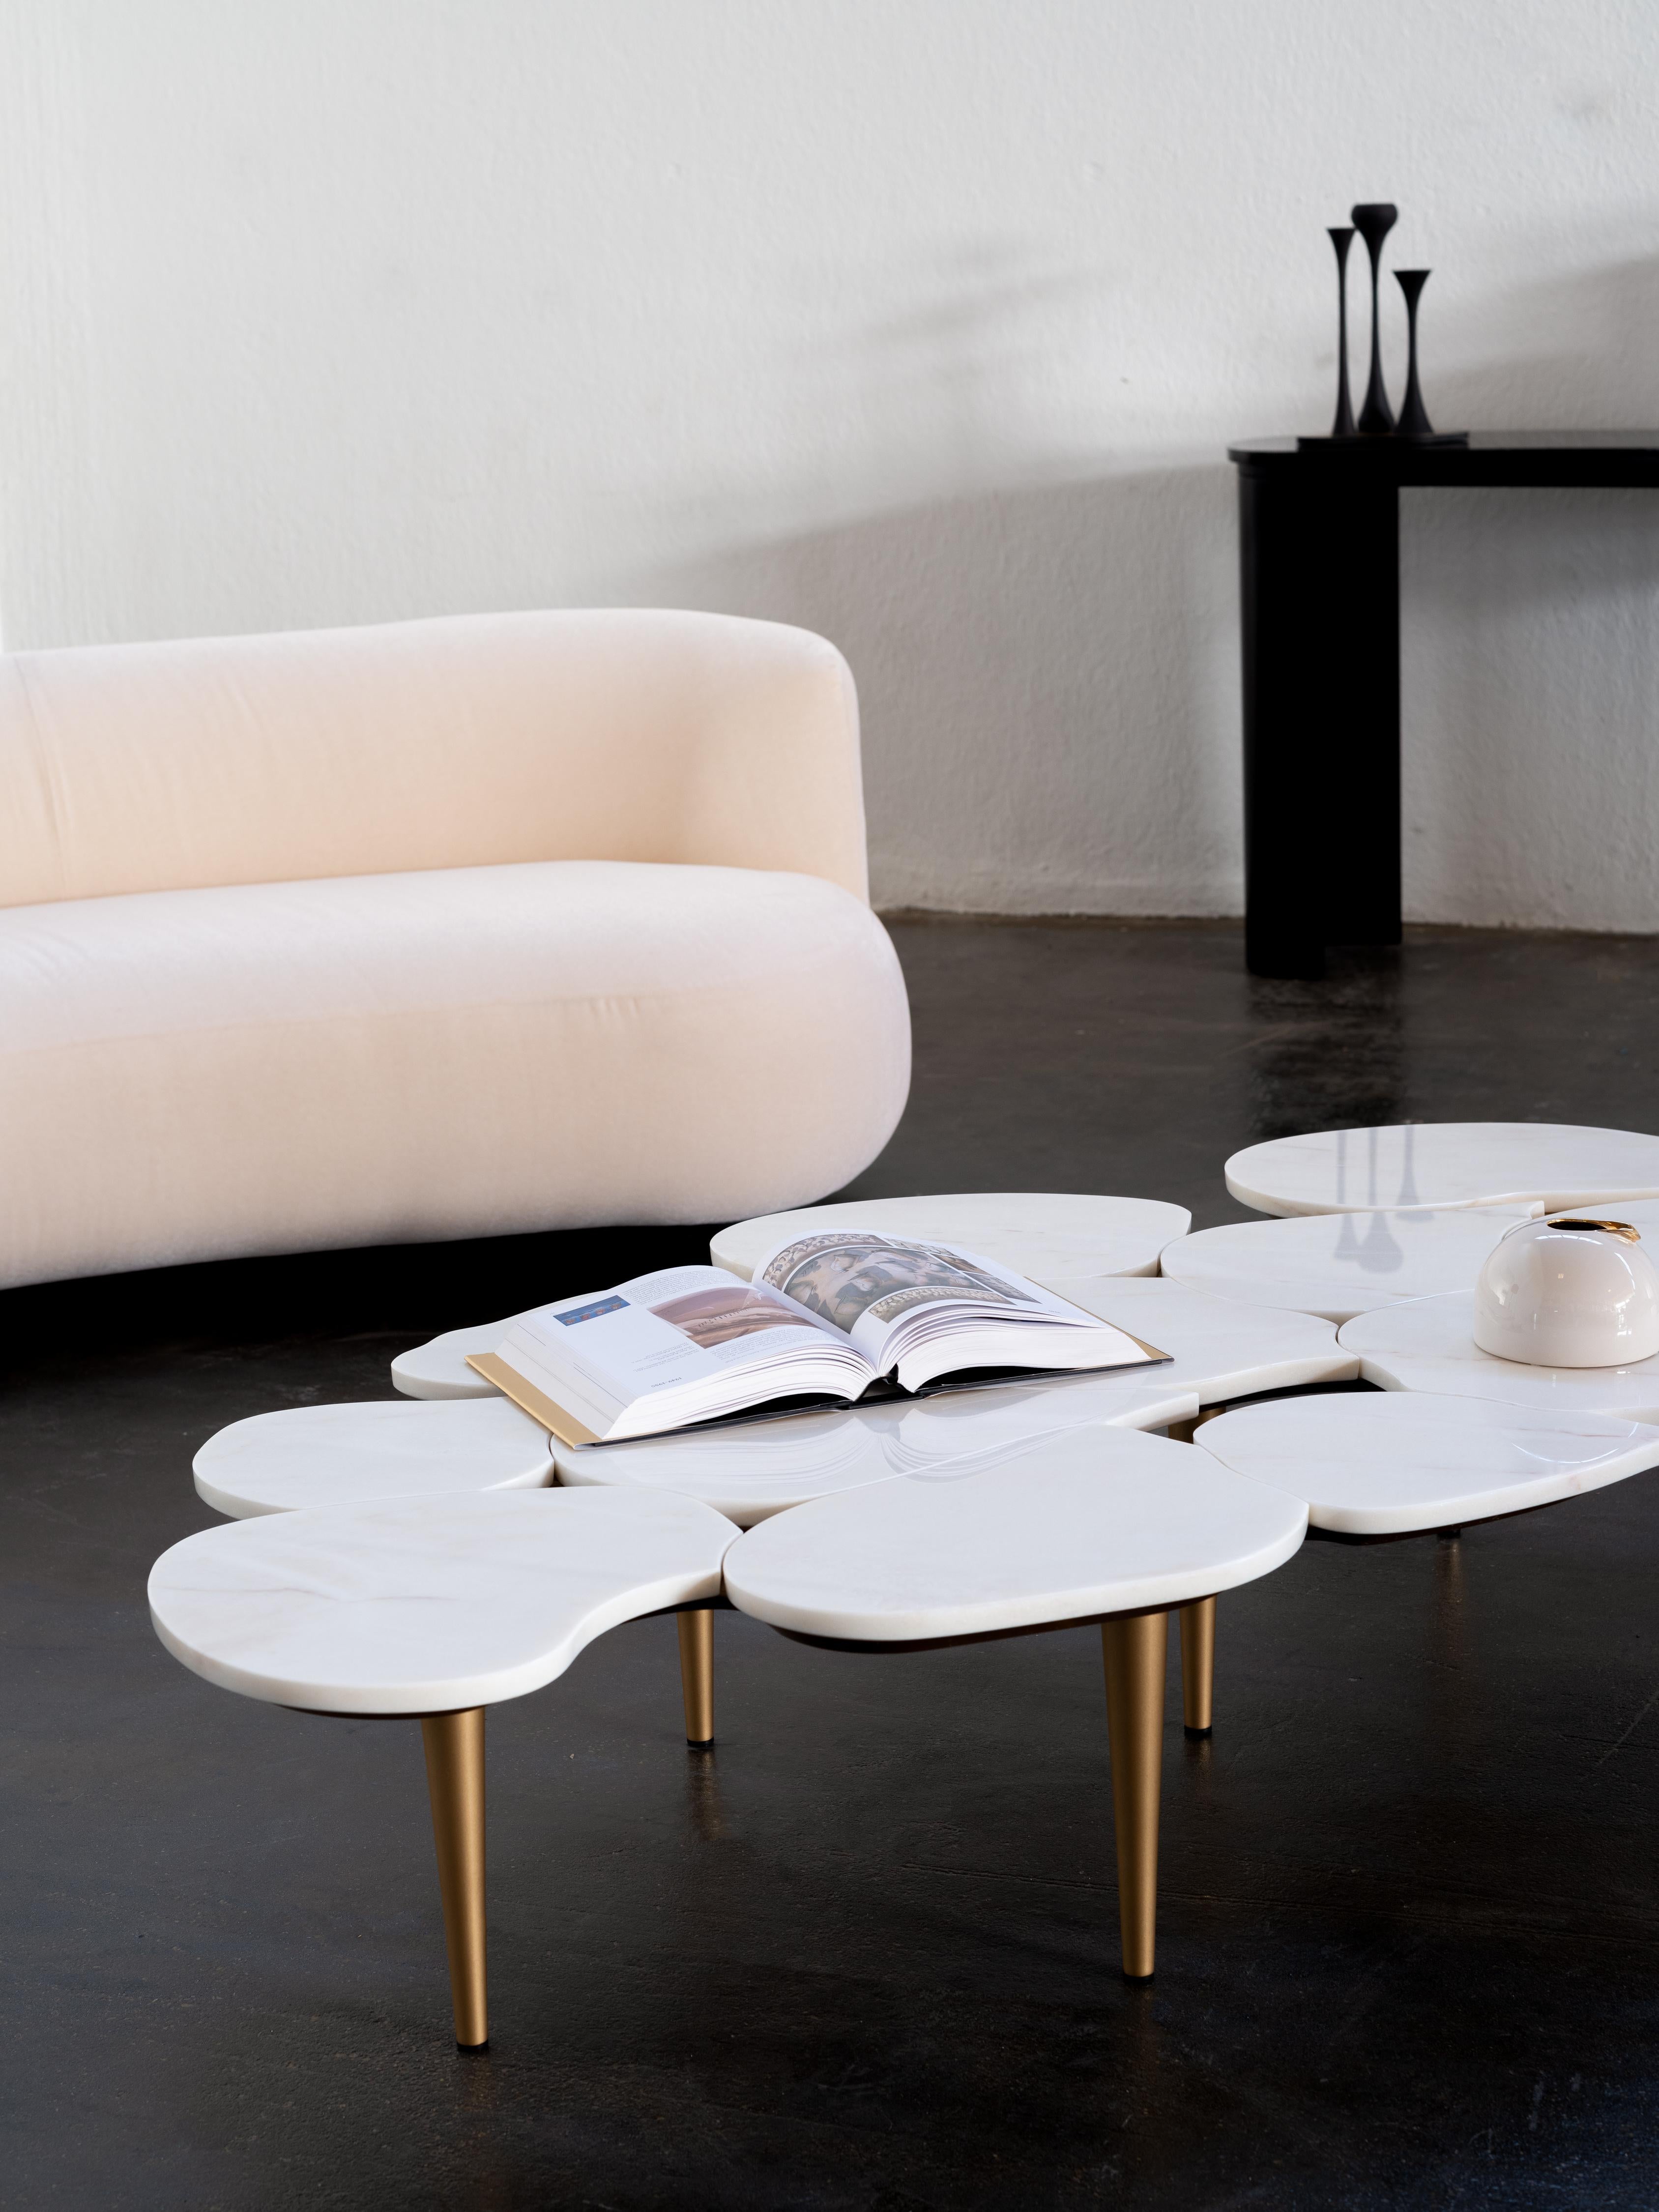 Infinity Coffee Table, Modern Collection, Handcrafted in Portugal - Europe by GF Modern.

The Infinity marble coffee table captures the passage of time in an infinite gaze. Featuring a petal-shaped top in Calacatta marble, Infinity unveils a flowing